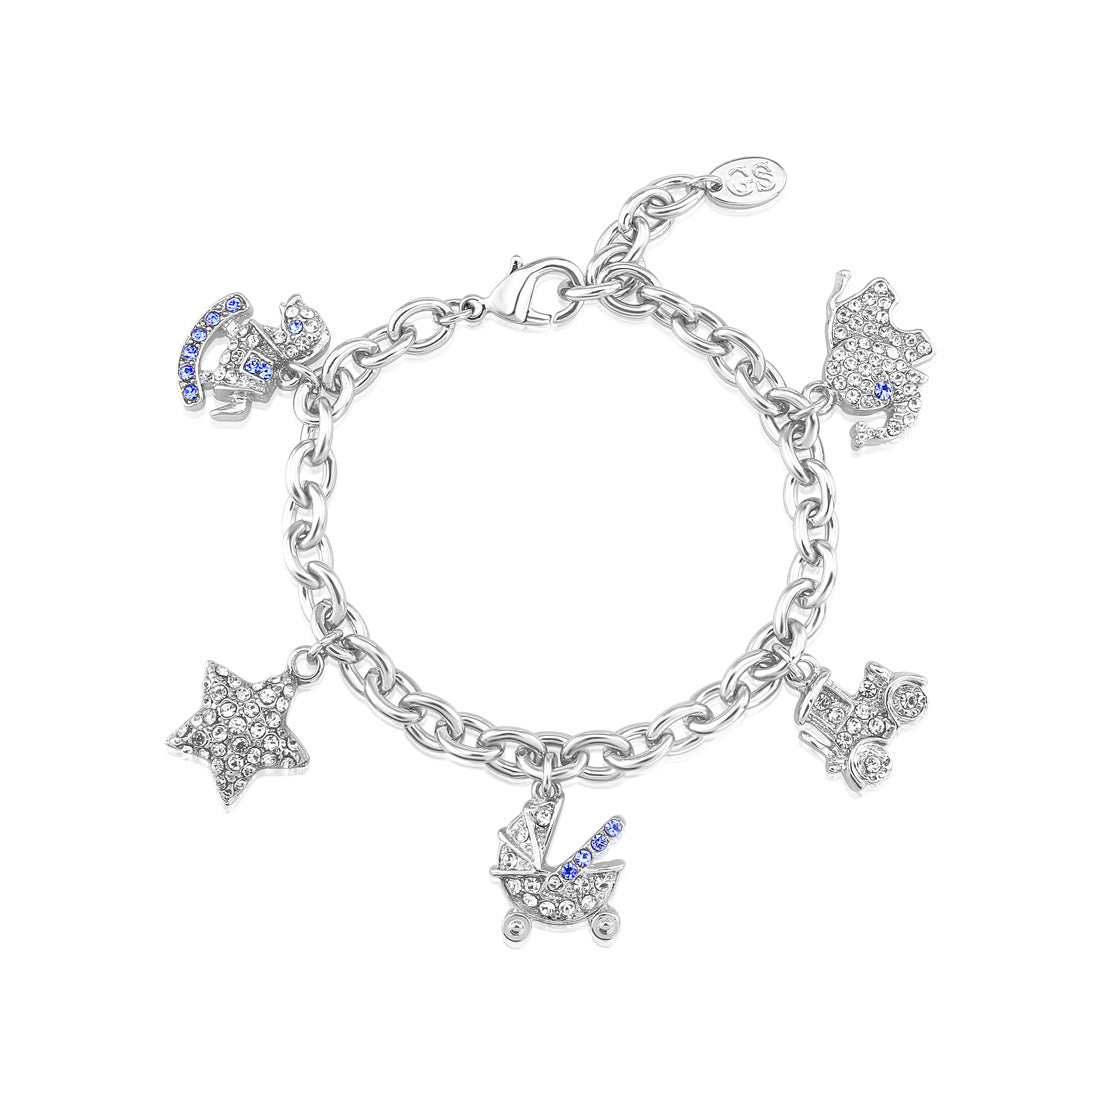 It's a Boy Baby Charm Bracelet for New Mums